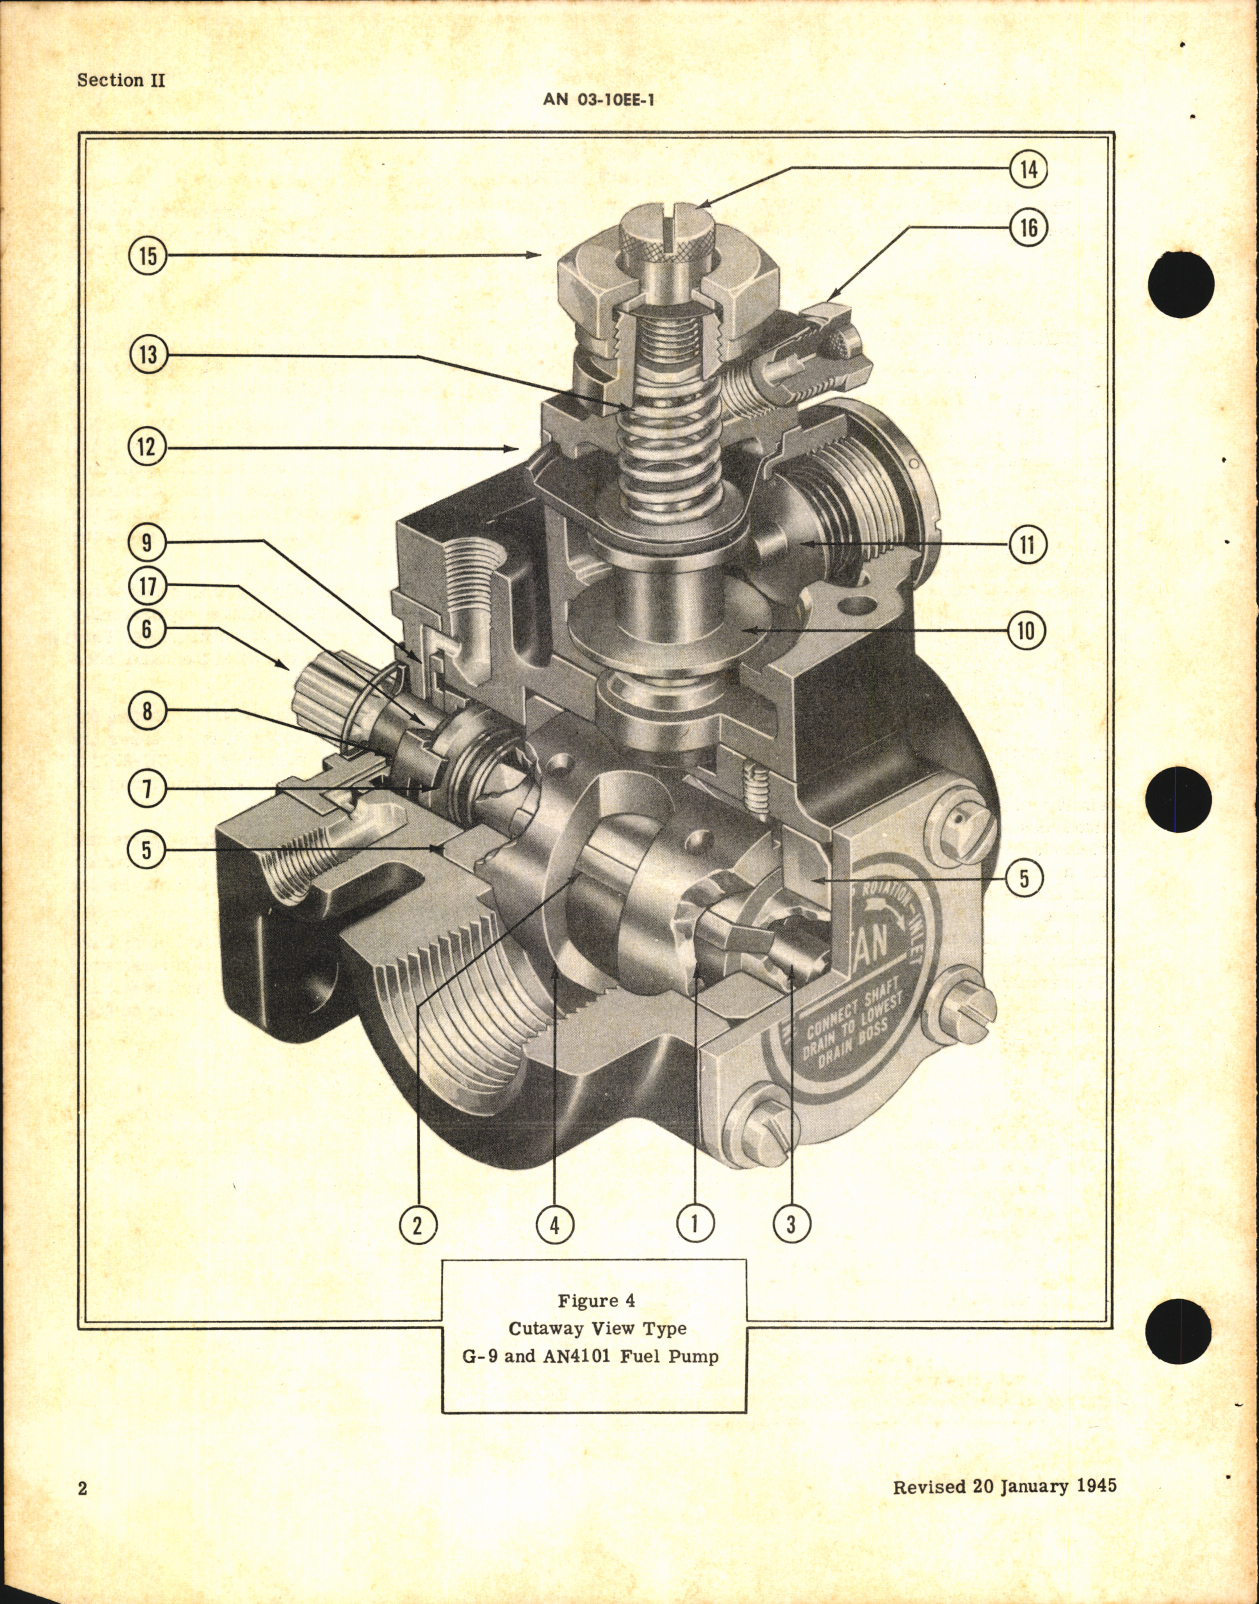 Sample page 6 from AirCorps Library document: Operation, Service, & Overhaul Inst w/ Parts Catalog for Engine-Driven Fuel Pumps